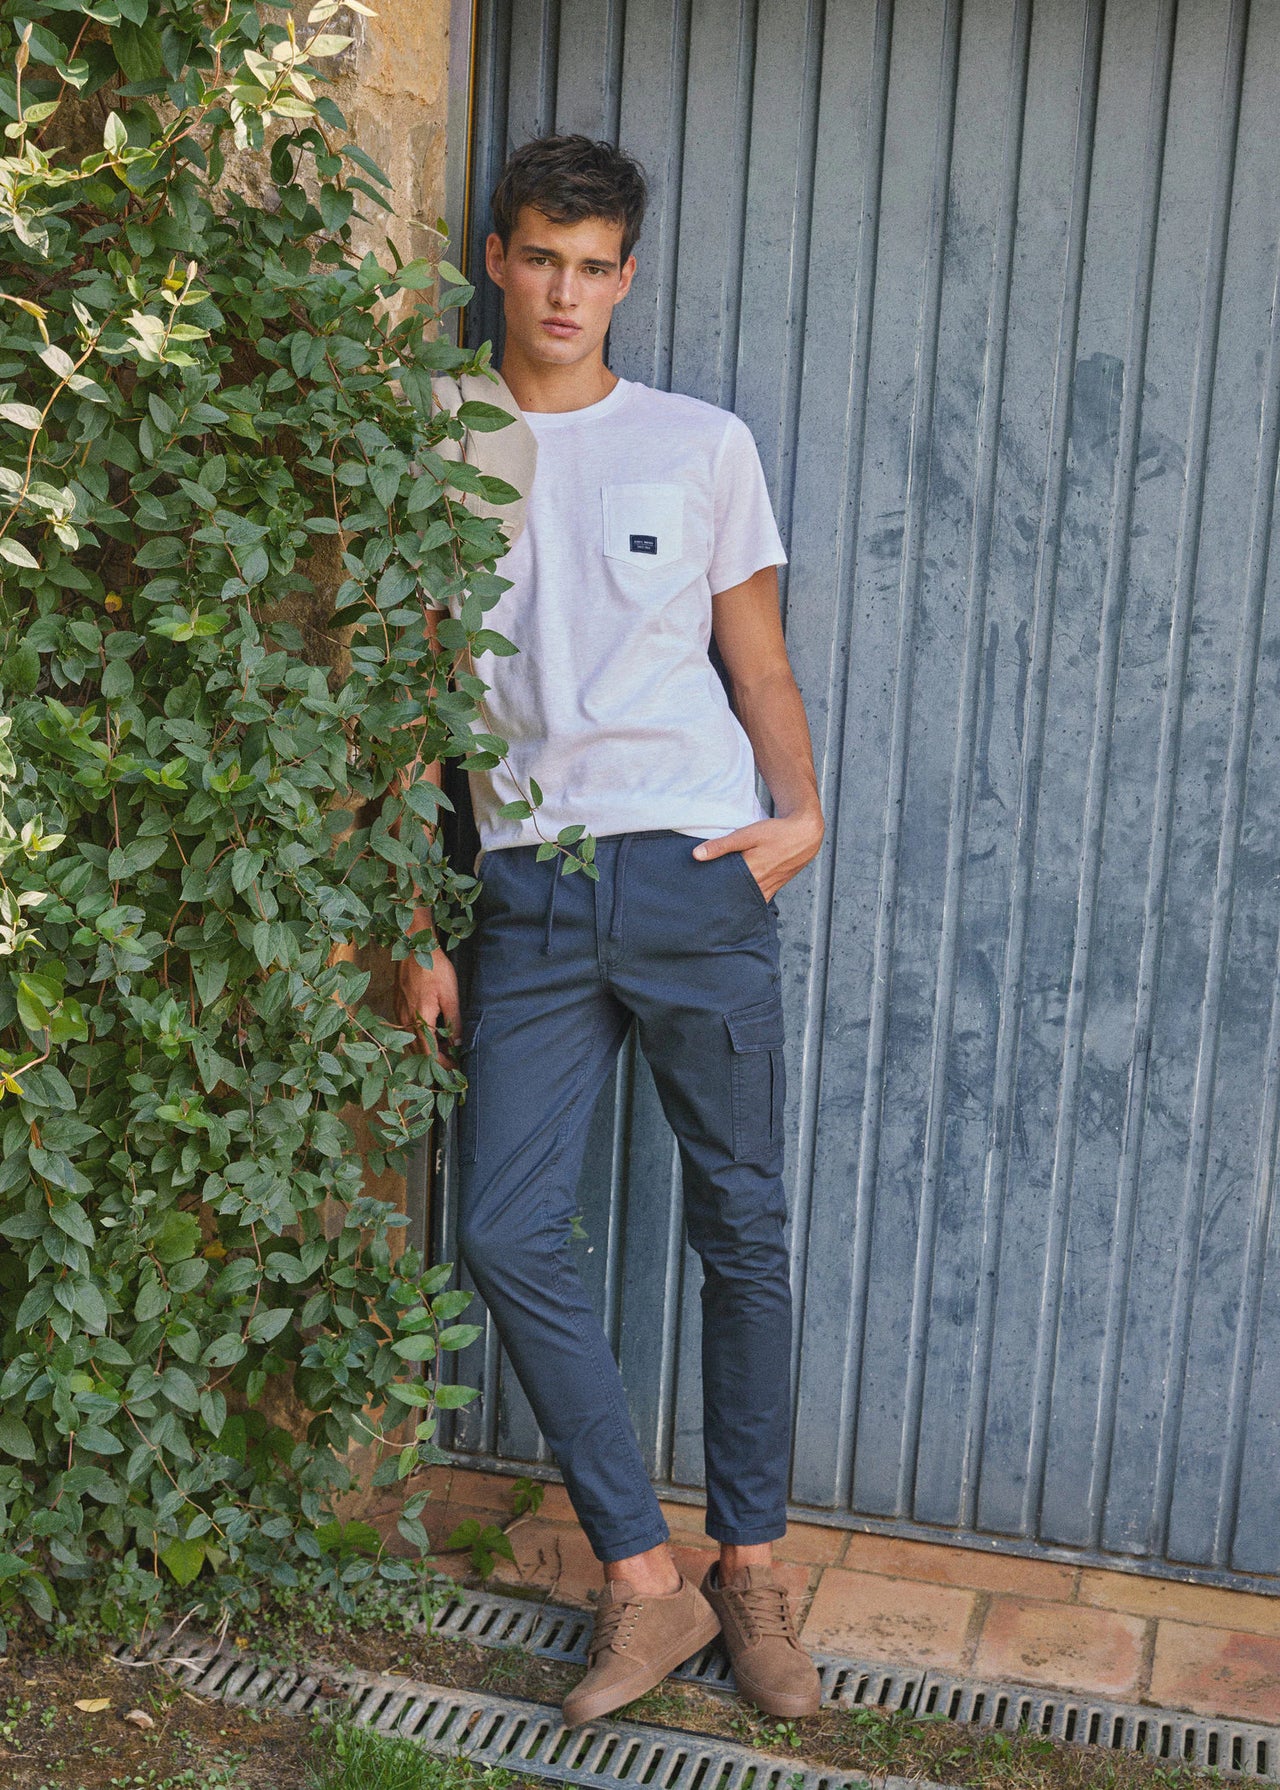 Cotton cargo trousers